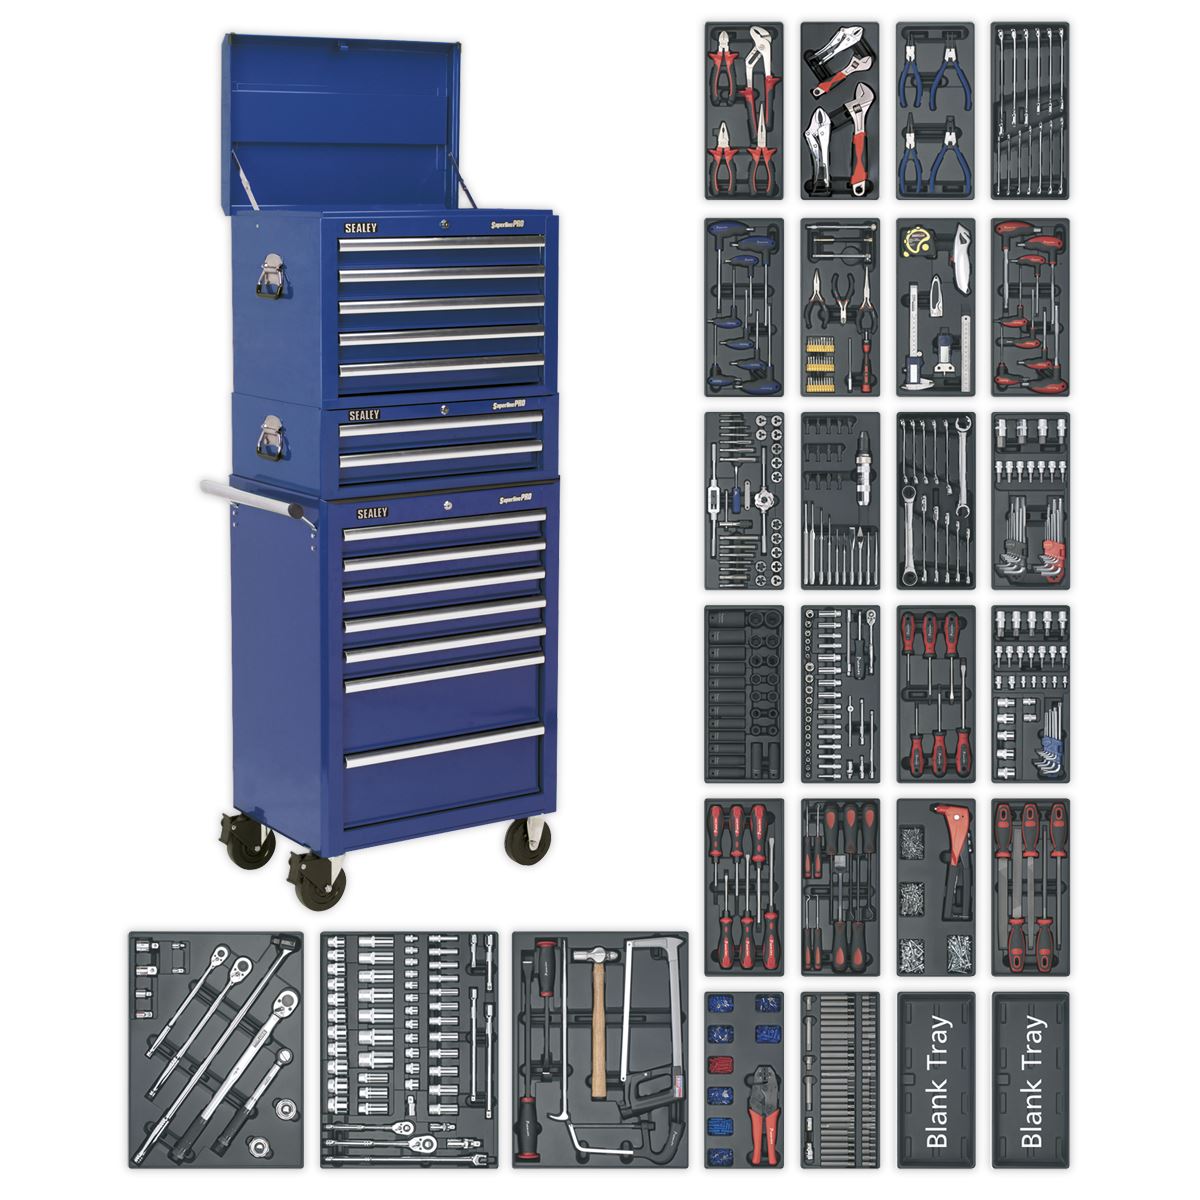 Sealey Superline Pro Tool Chest Combination 14 Drawer with Ball-Bearing Slides - Blue & 1179pc Tool Kit